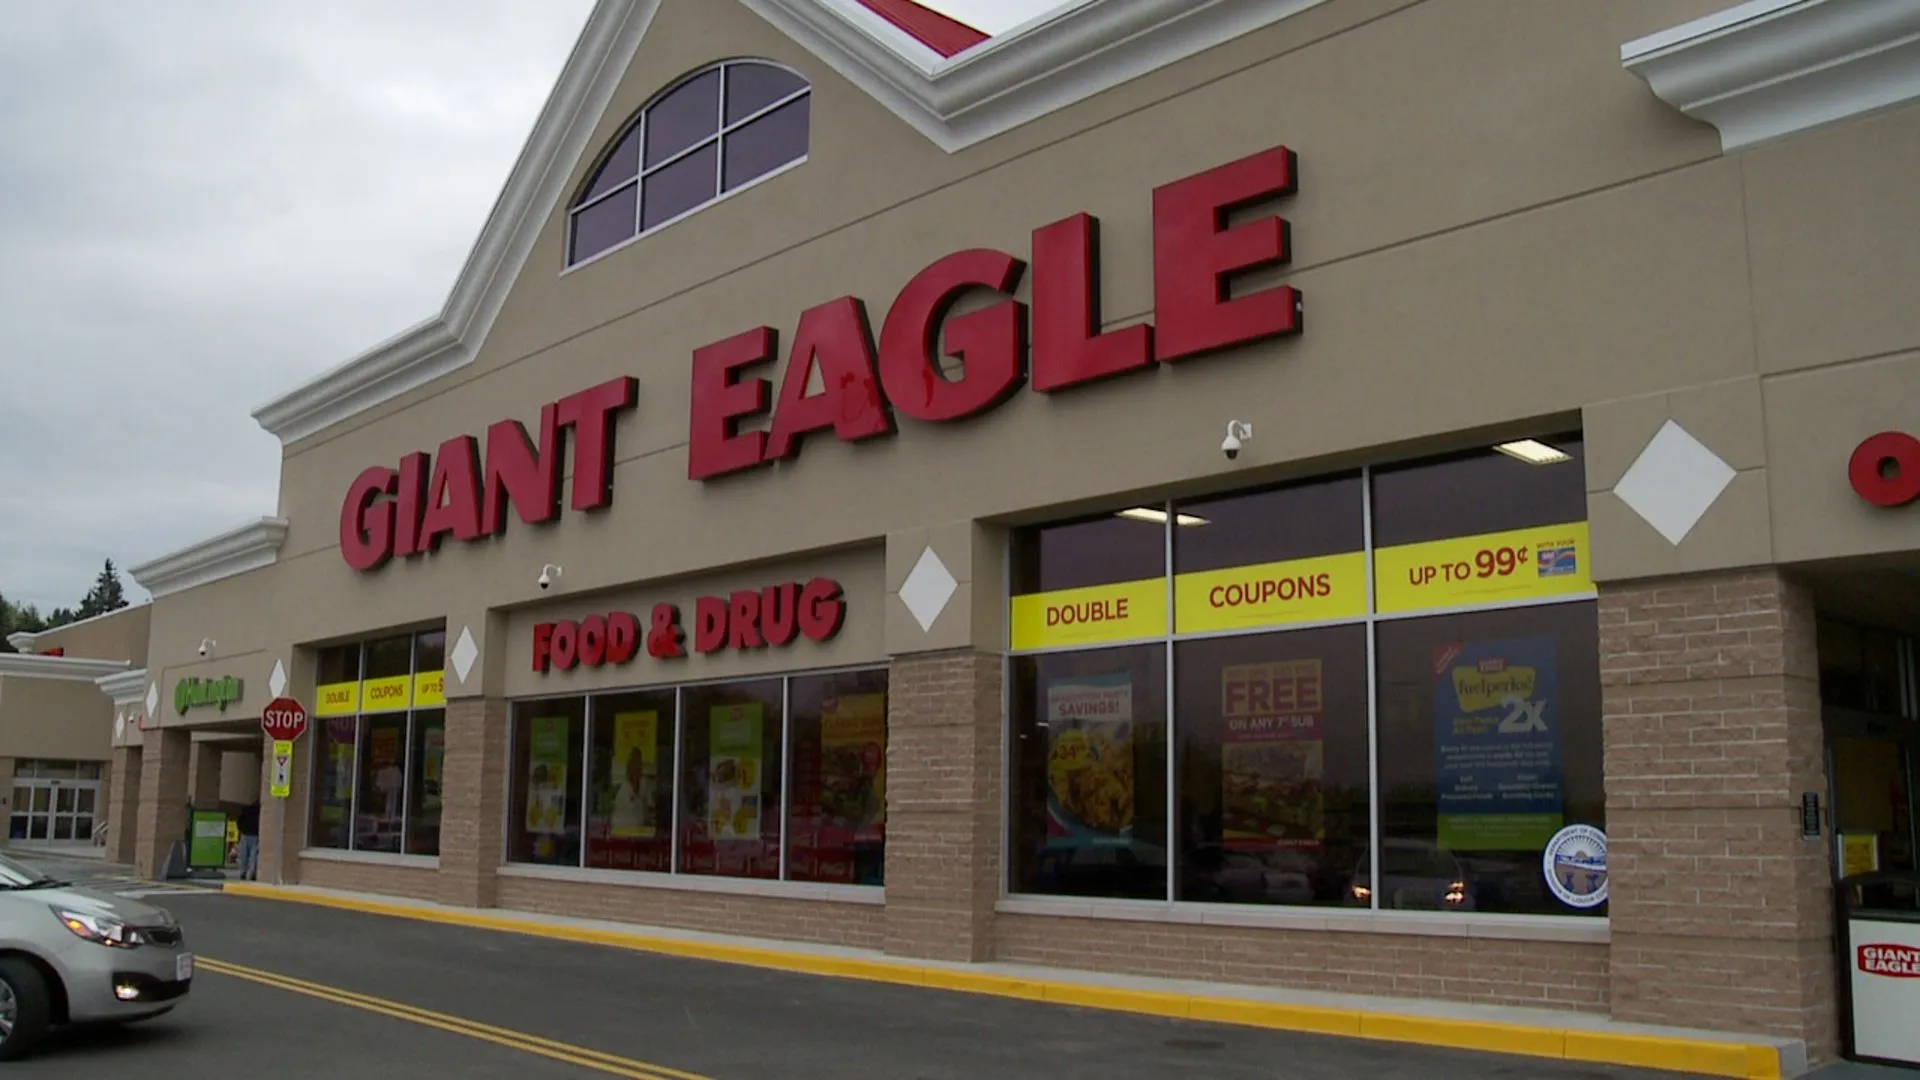 Overview of the Giant Eagle